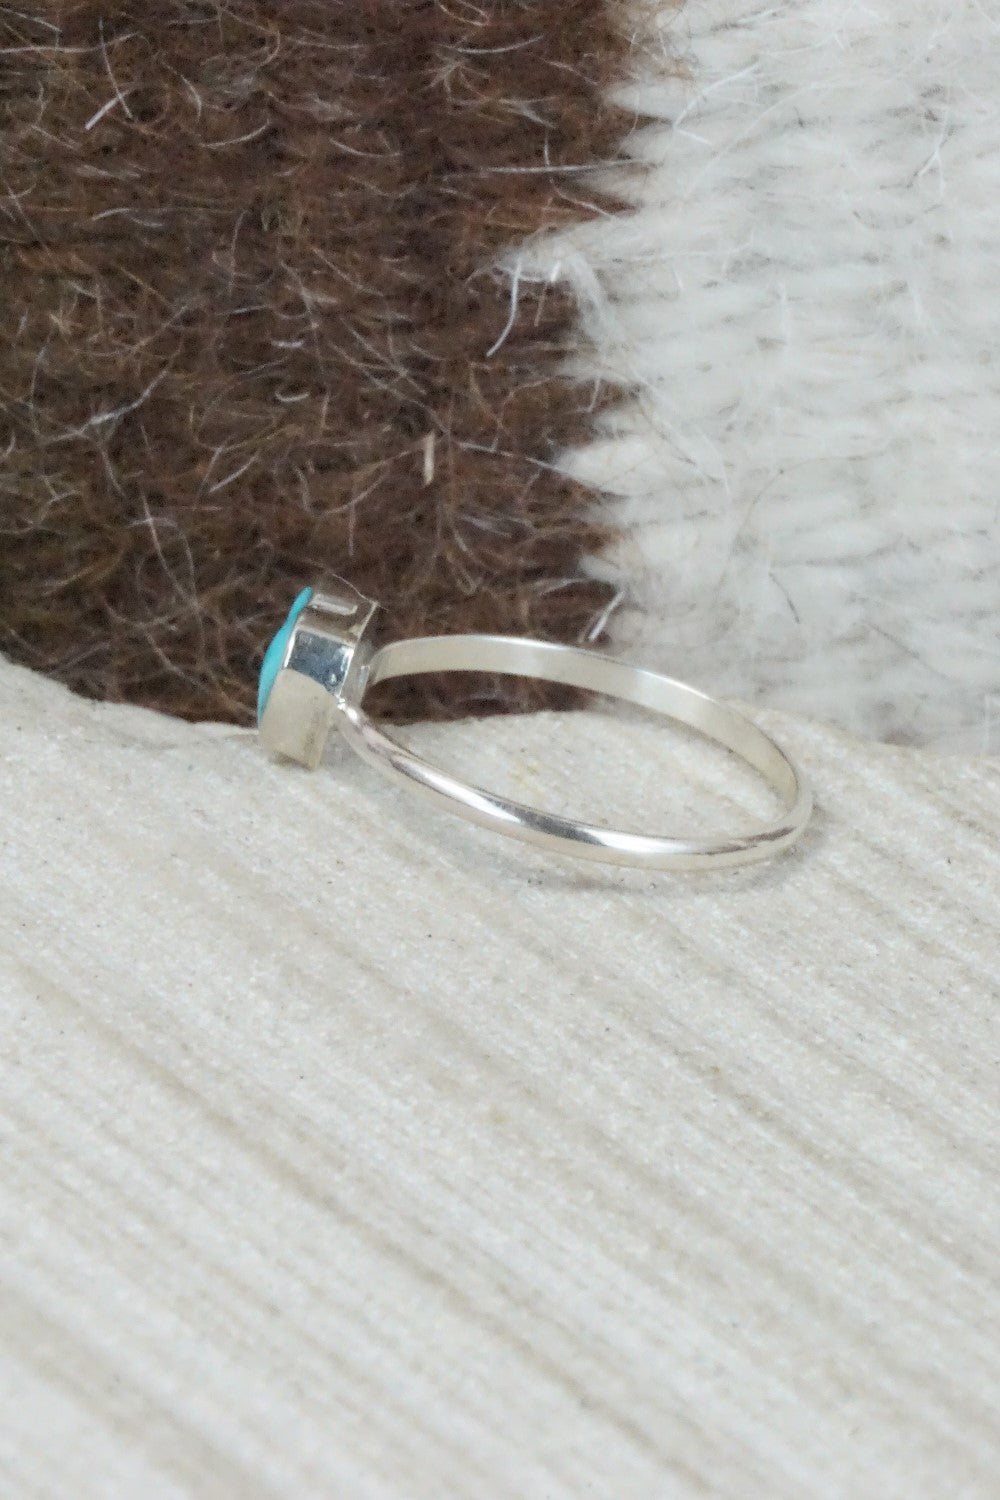 Turquoise & Sterling Silver Ring - A Lalio - Size 4.75